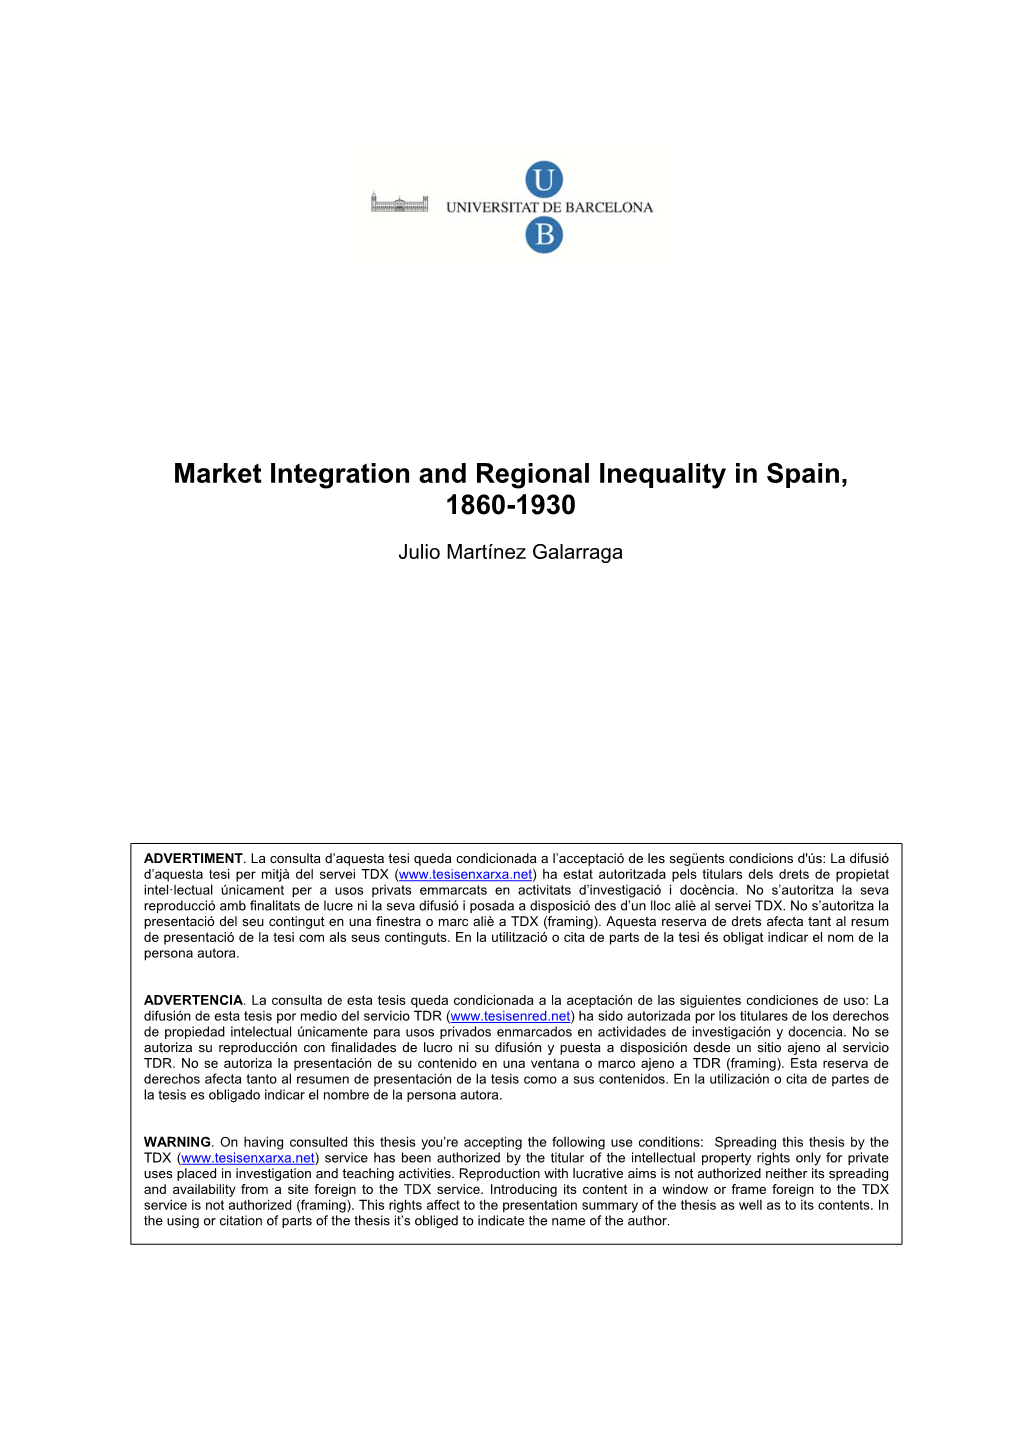 Market Integration and Regional Inequality in Spain, 1860-1930